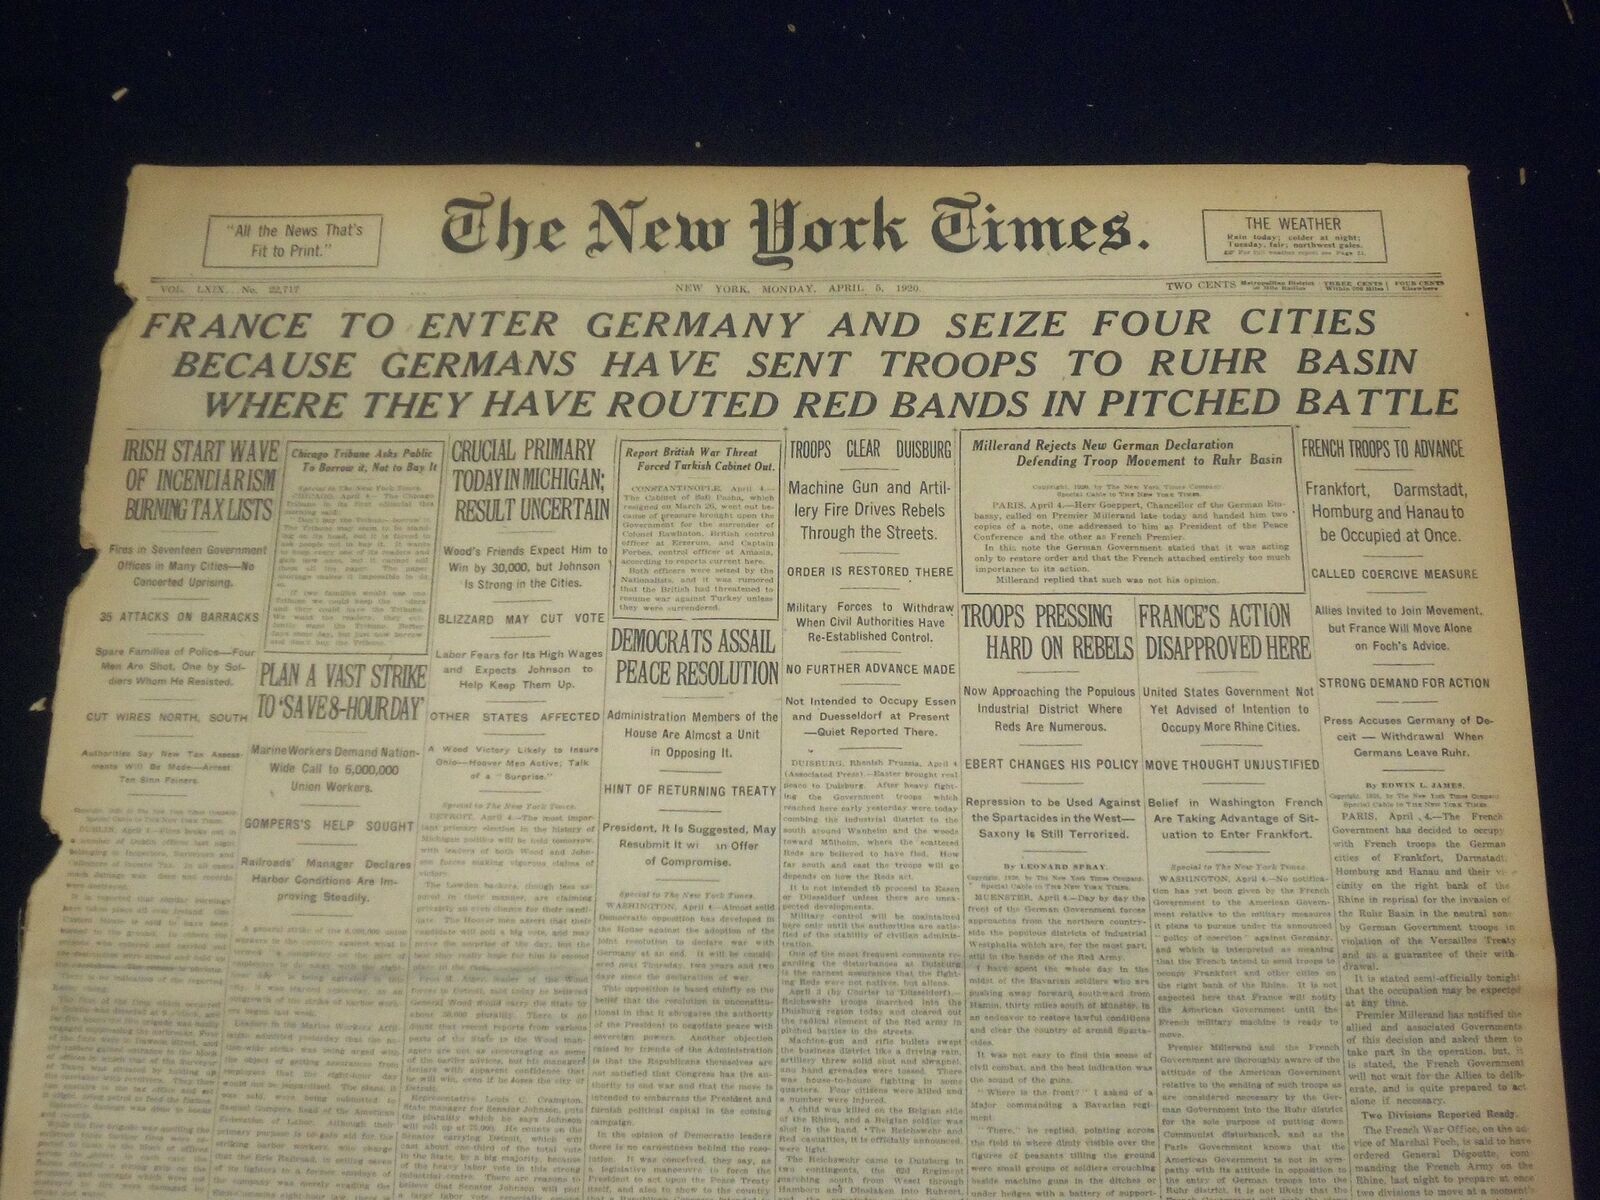 1920 APRIL 5 NEW YORK TIMES - FRANCE TO ENTER GERMANY TO SEIZE 4 CITIES- NT 8281